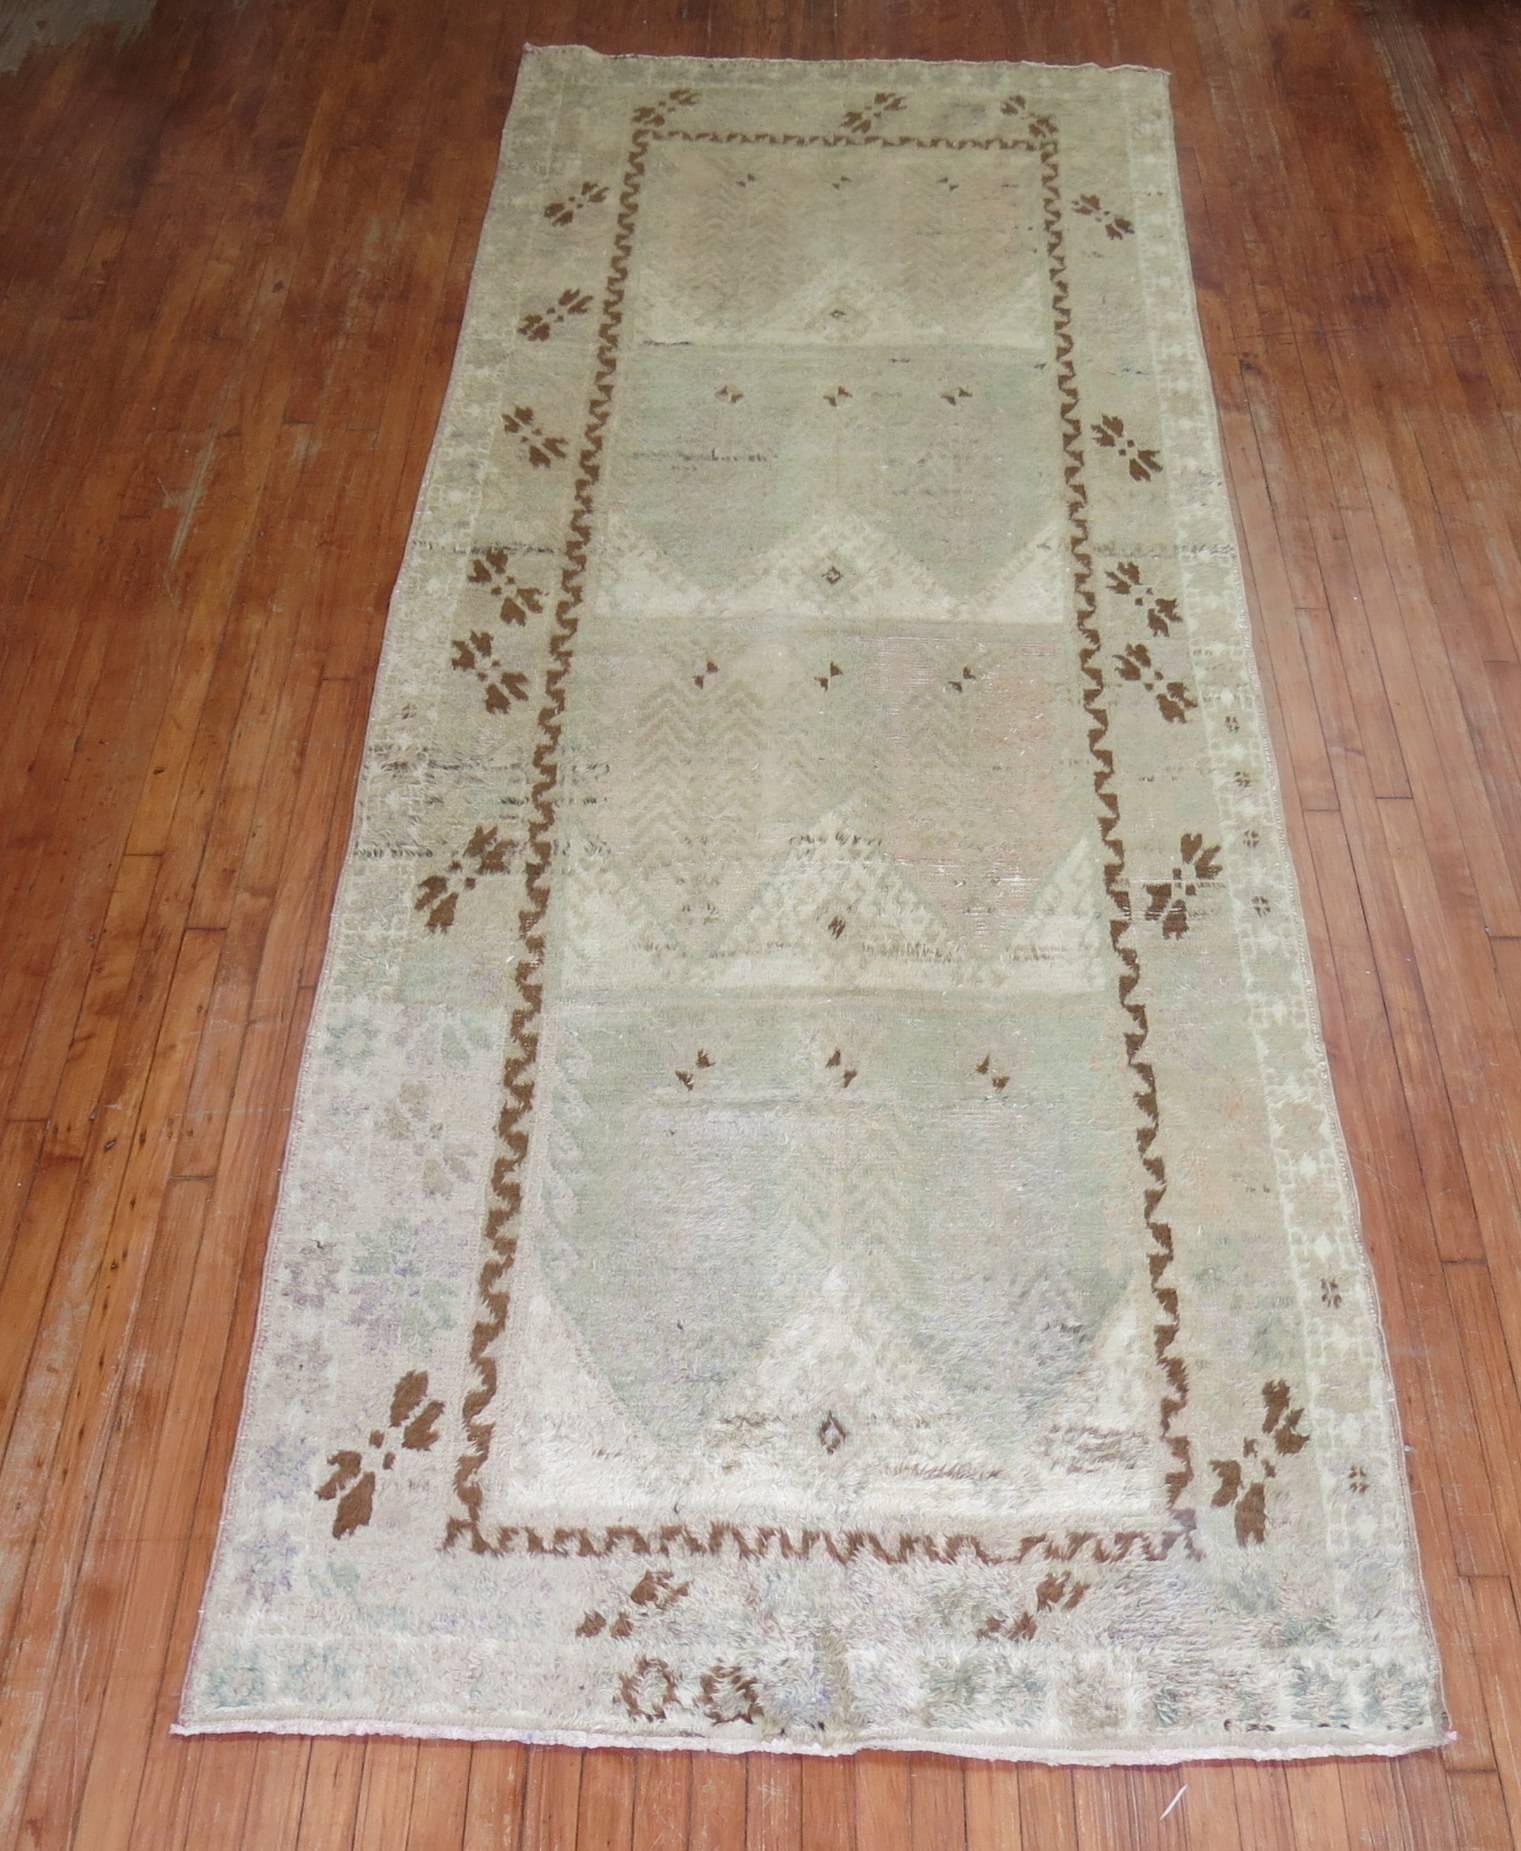 Cream, sea foam, mint green, chocolate brown and fleshy color accents with an array of abrashes make this rug very decorative and compelling. We love the nomadic pattern too. 

Measures: 4'7